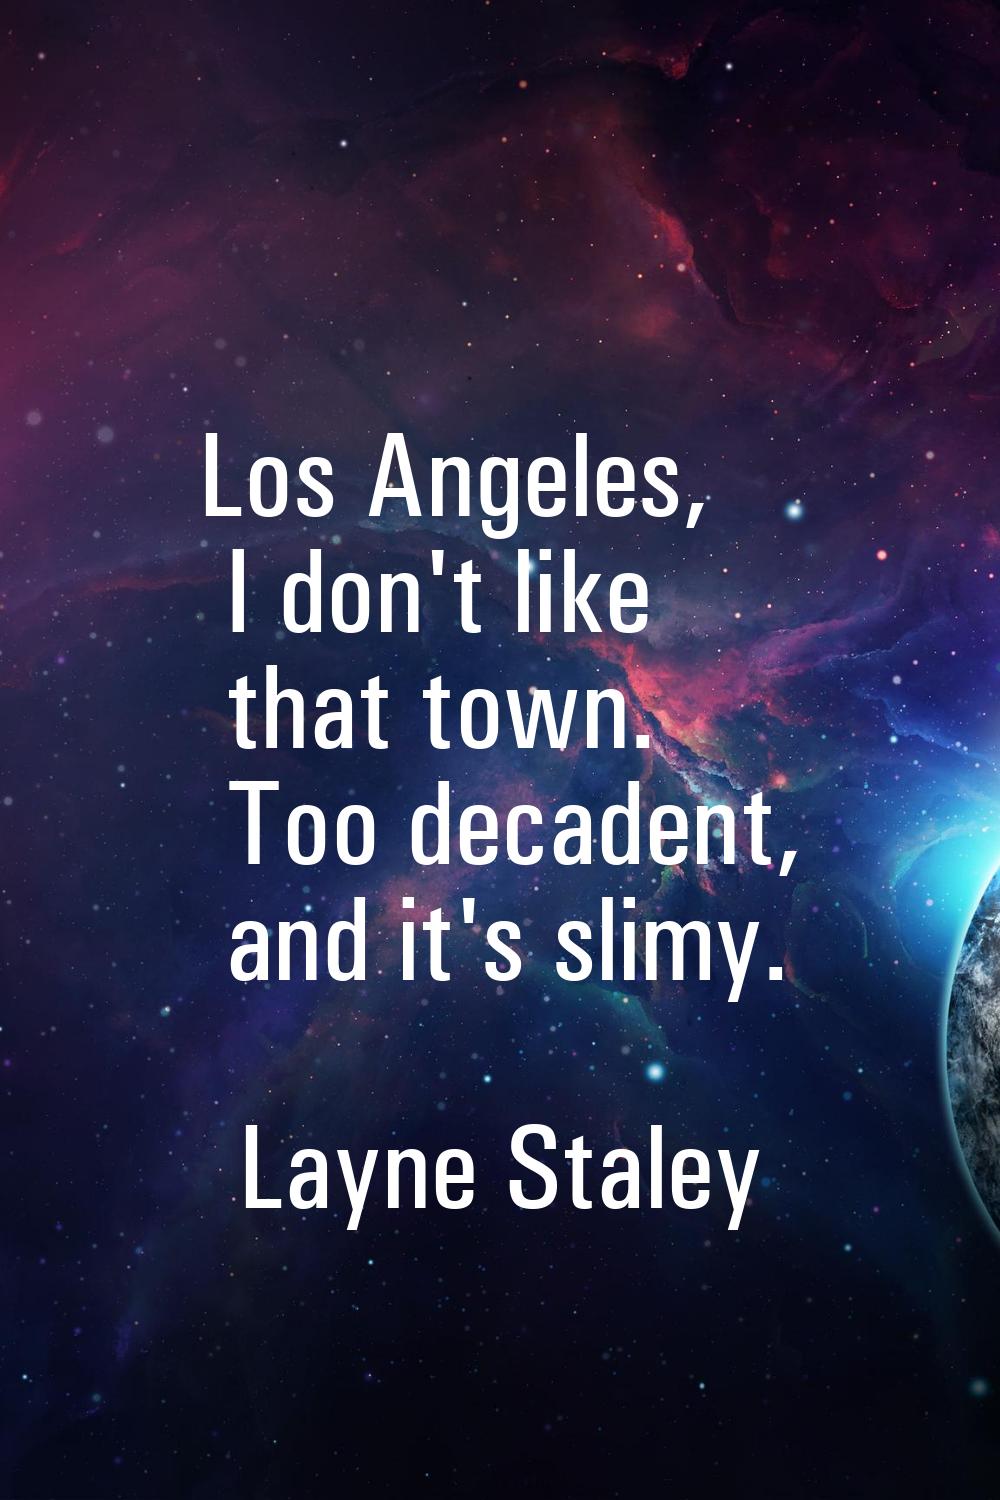 Los Angeles, I don't like that town. Too decadent, and it's slimy.